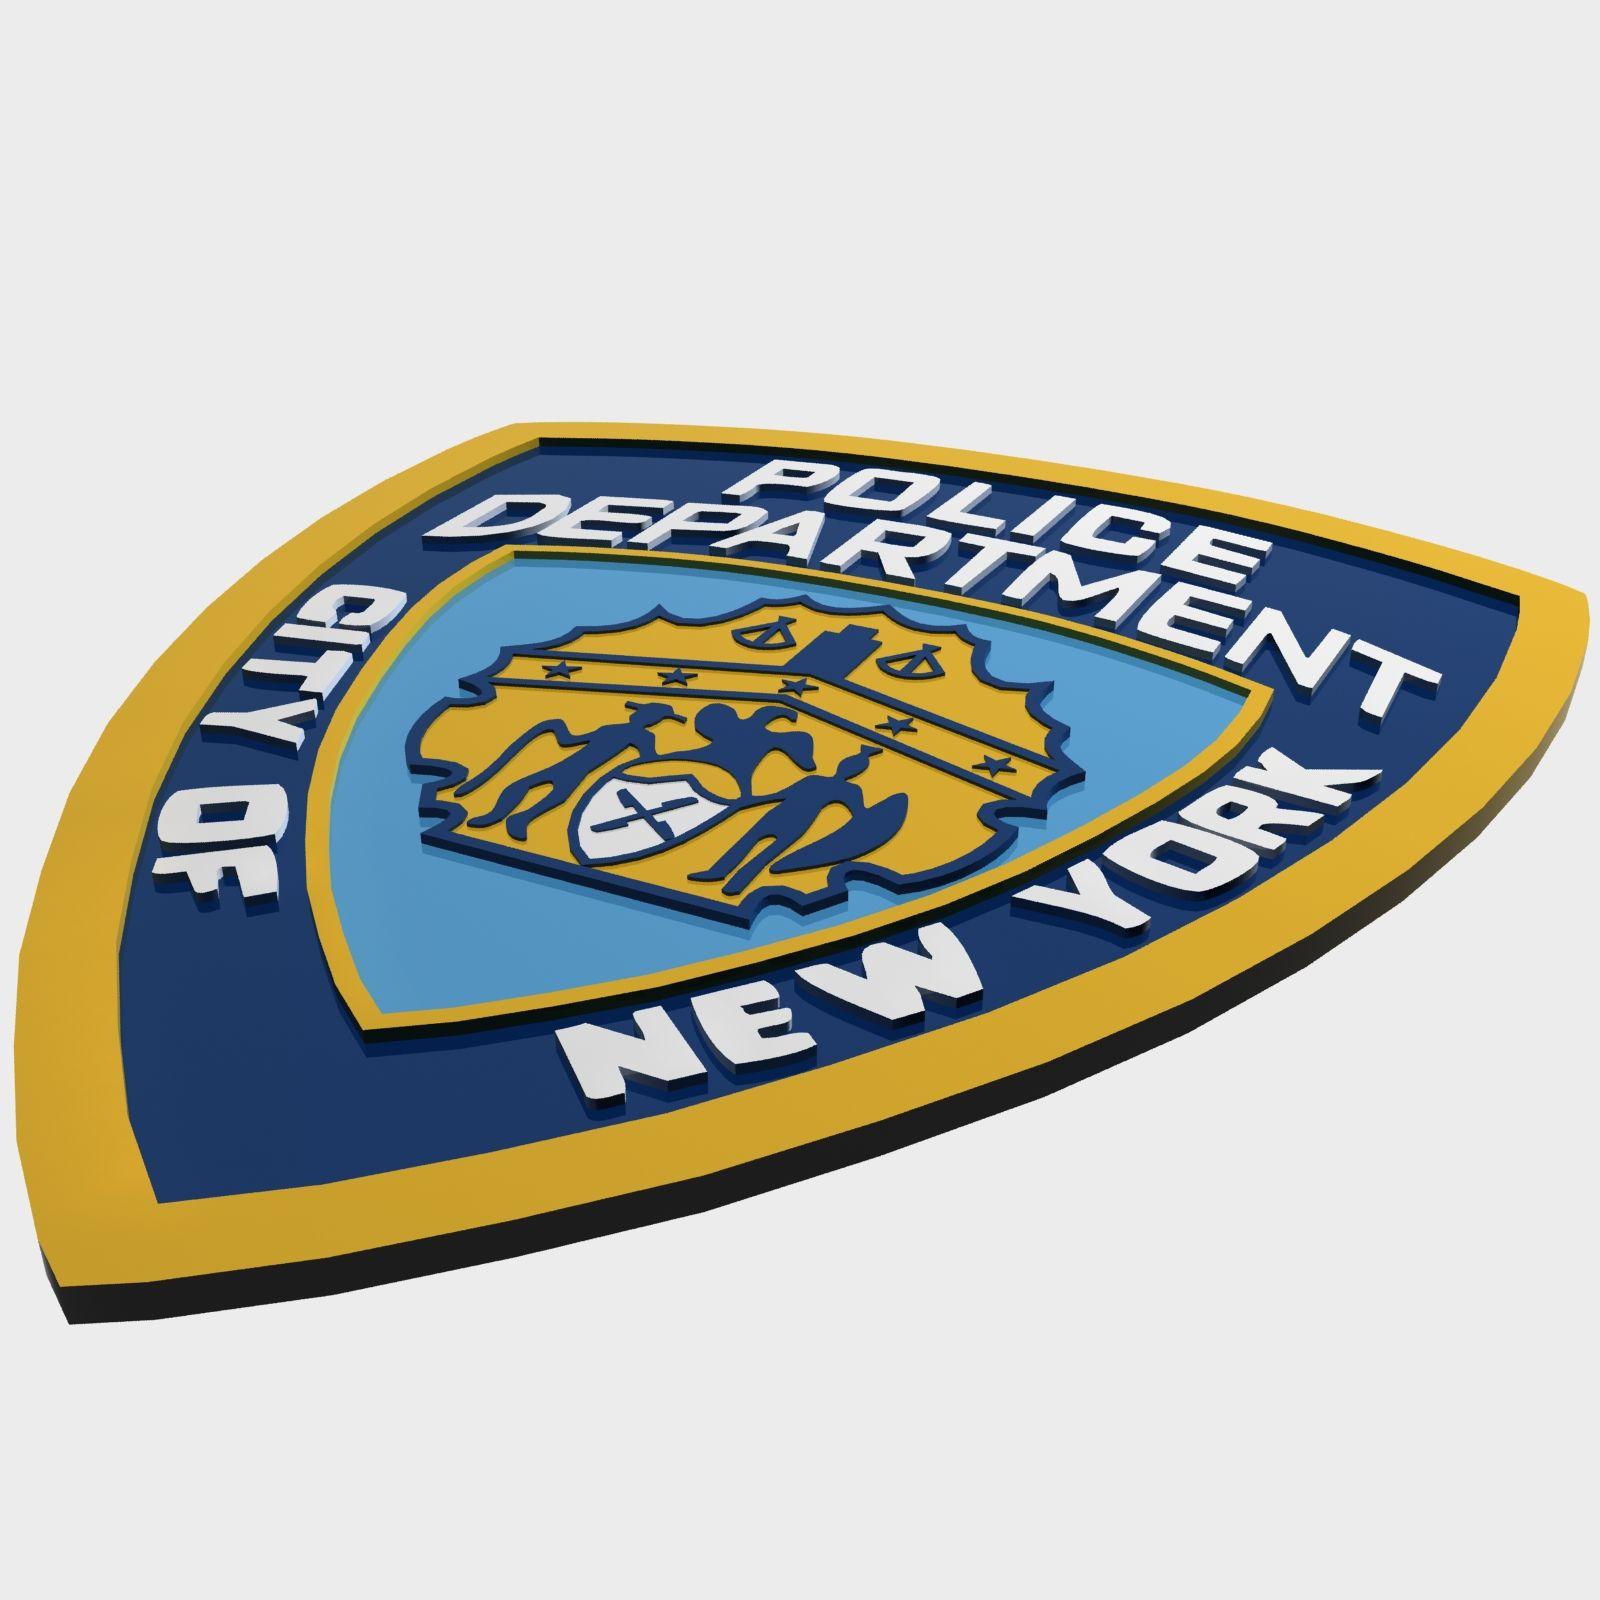 NYPD Logo - NYPD Police Department logo #Police, #NYPD, #logo, #Department | 3d ...